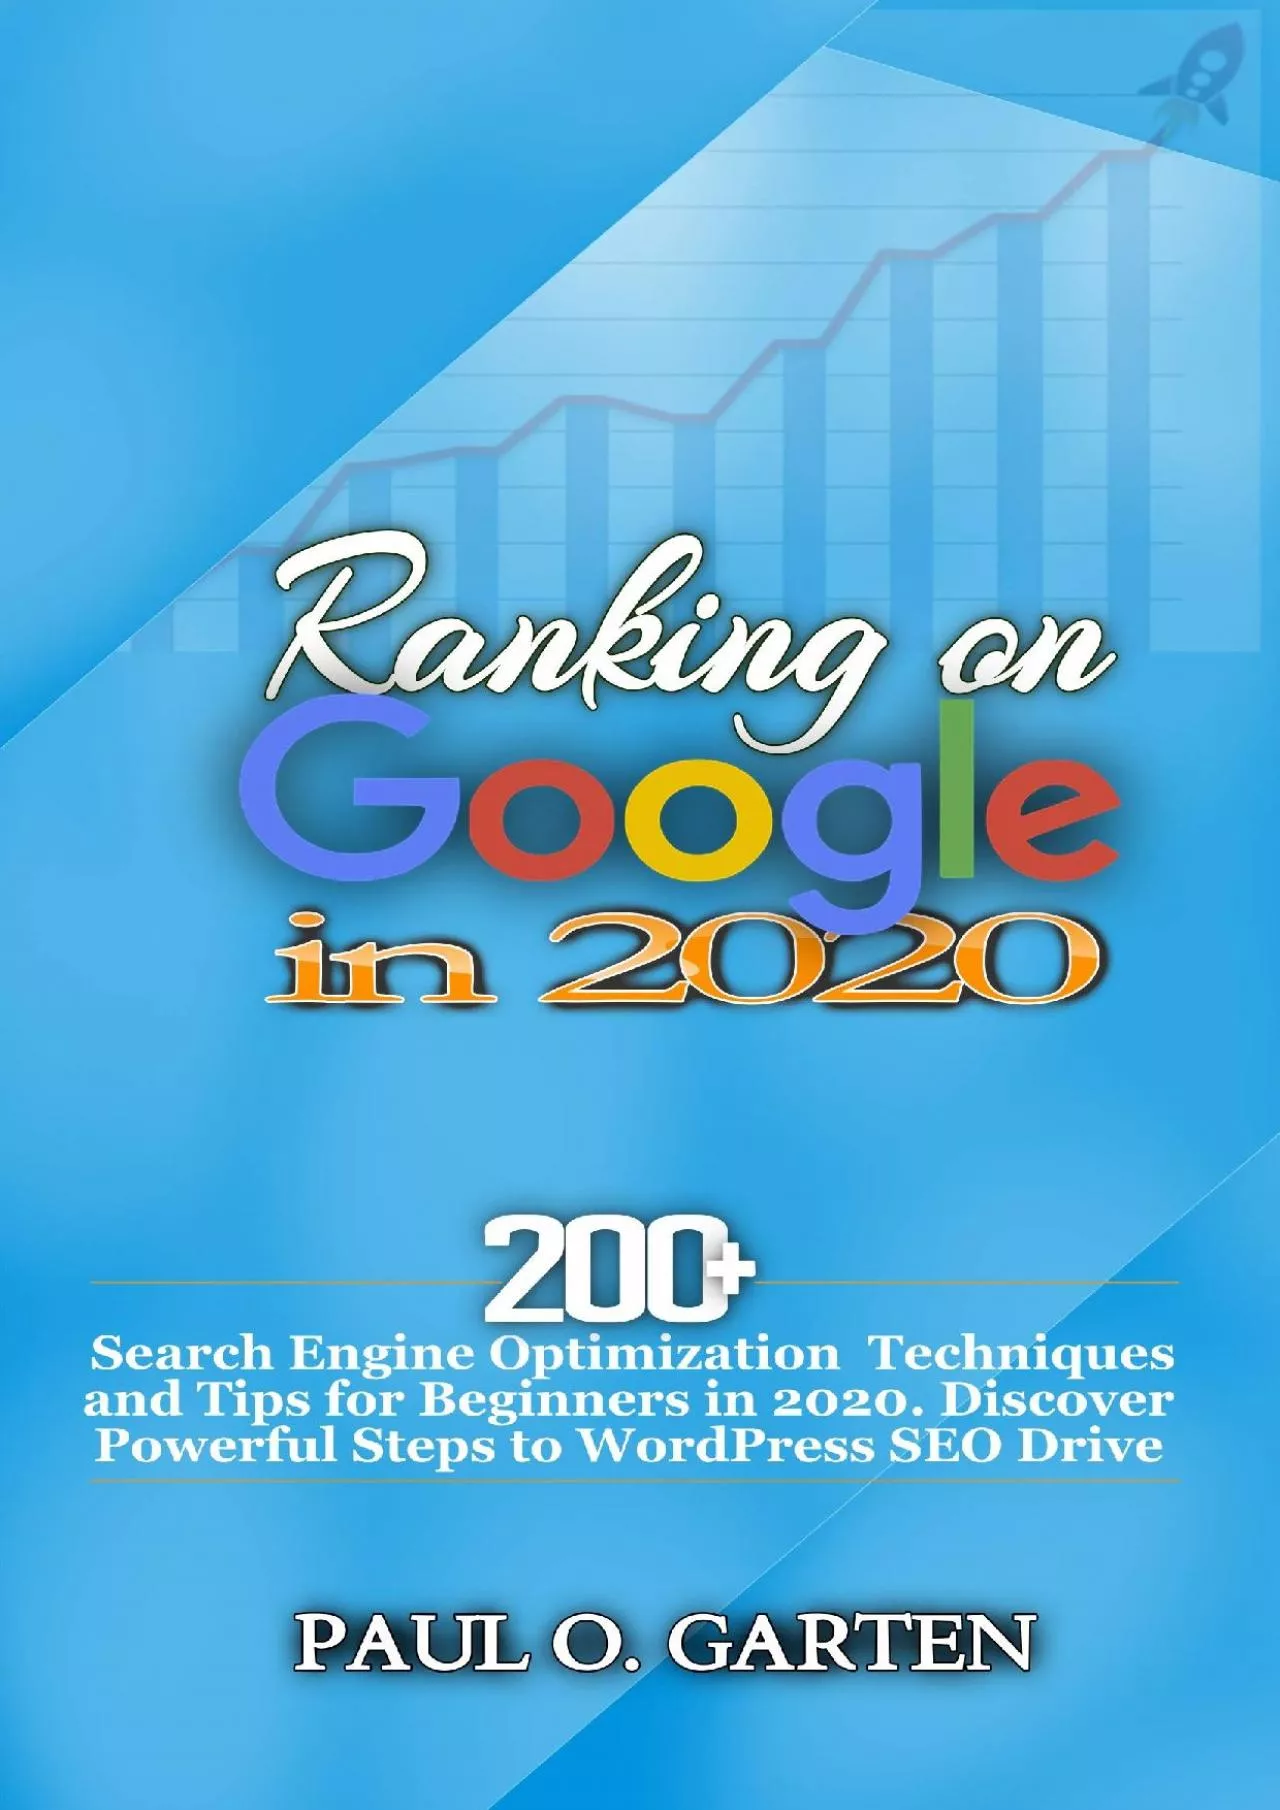 (EBOOK)-Ranking on Google in 2020: 200+ Search Engine Optimization Techniques and Tips